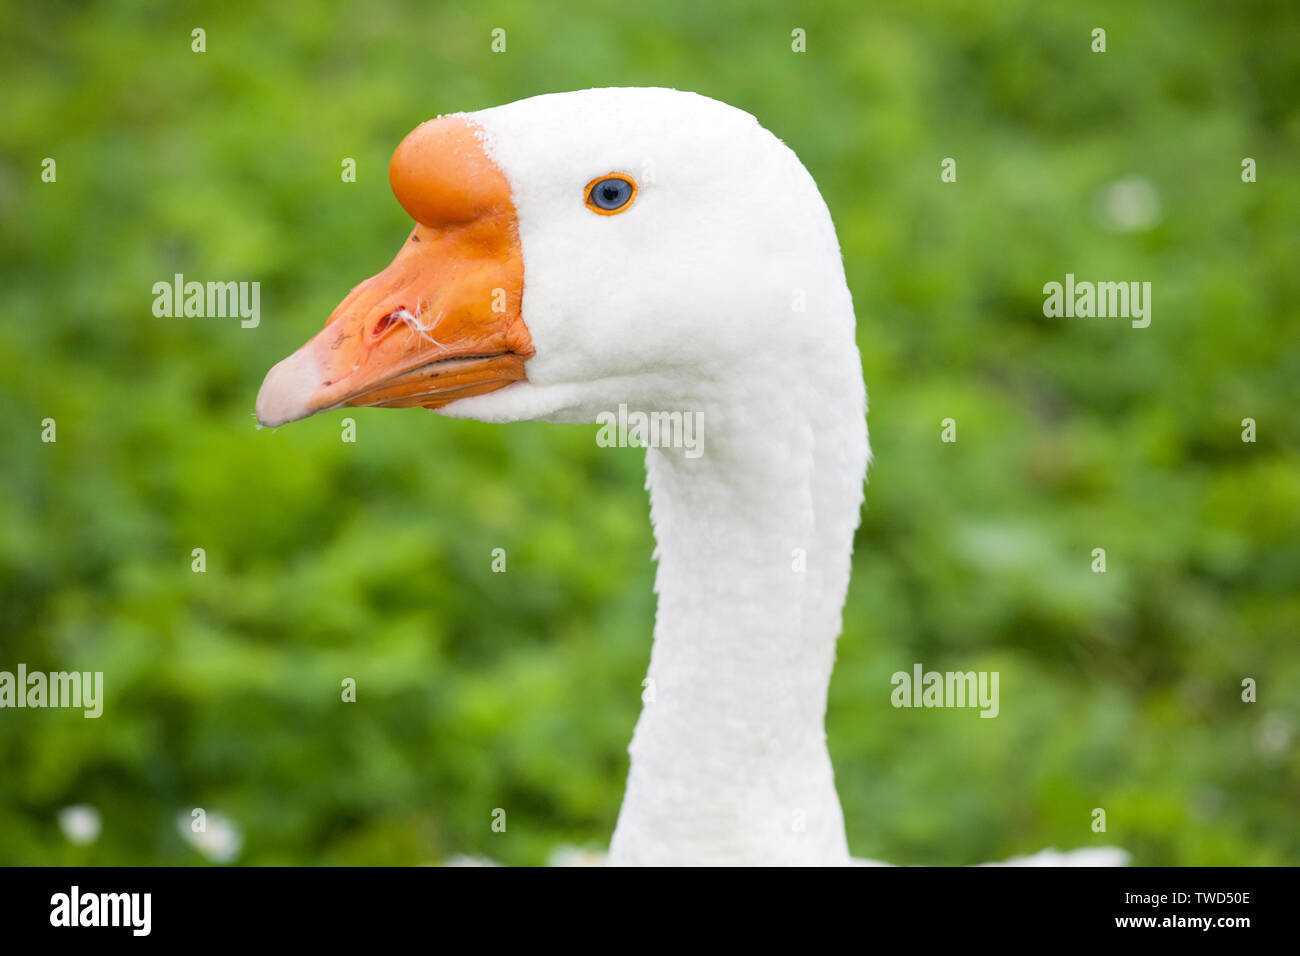 white goose head closeup on green grass meadow background Stock Photo